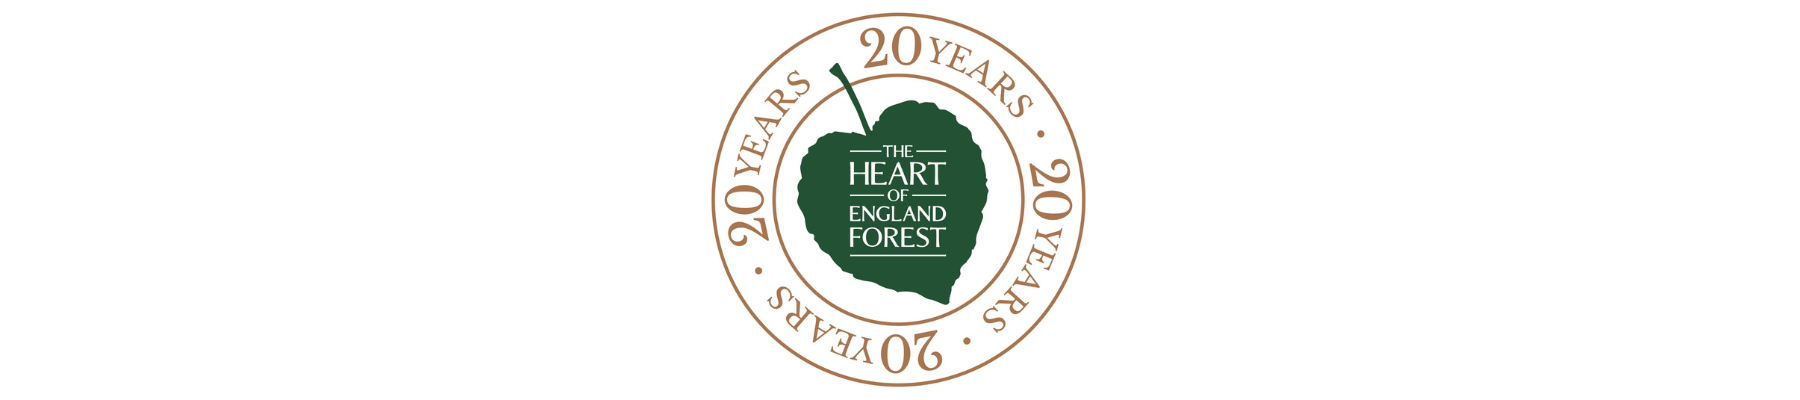 Celebrating 20 years as a charity - the logo